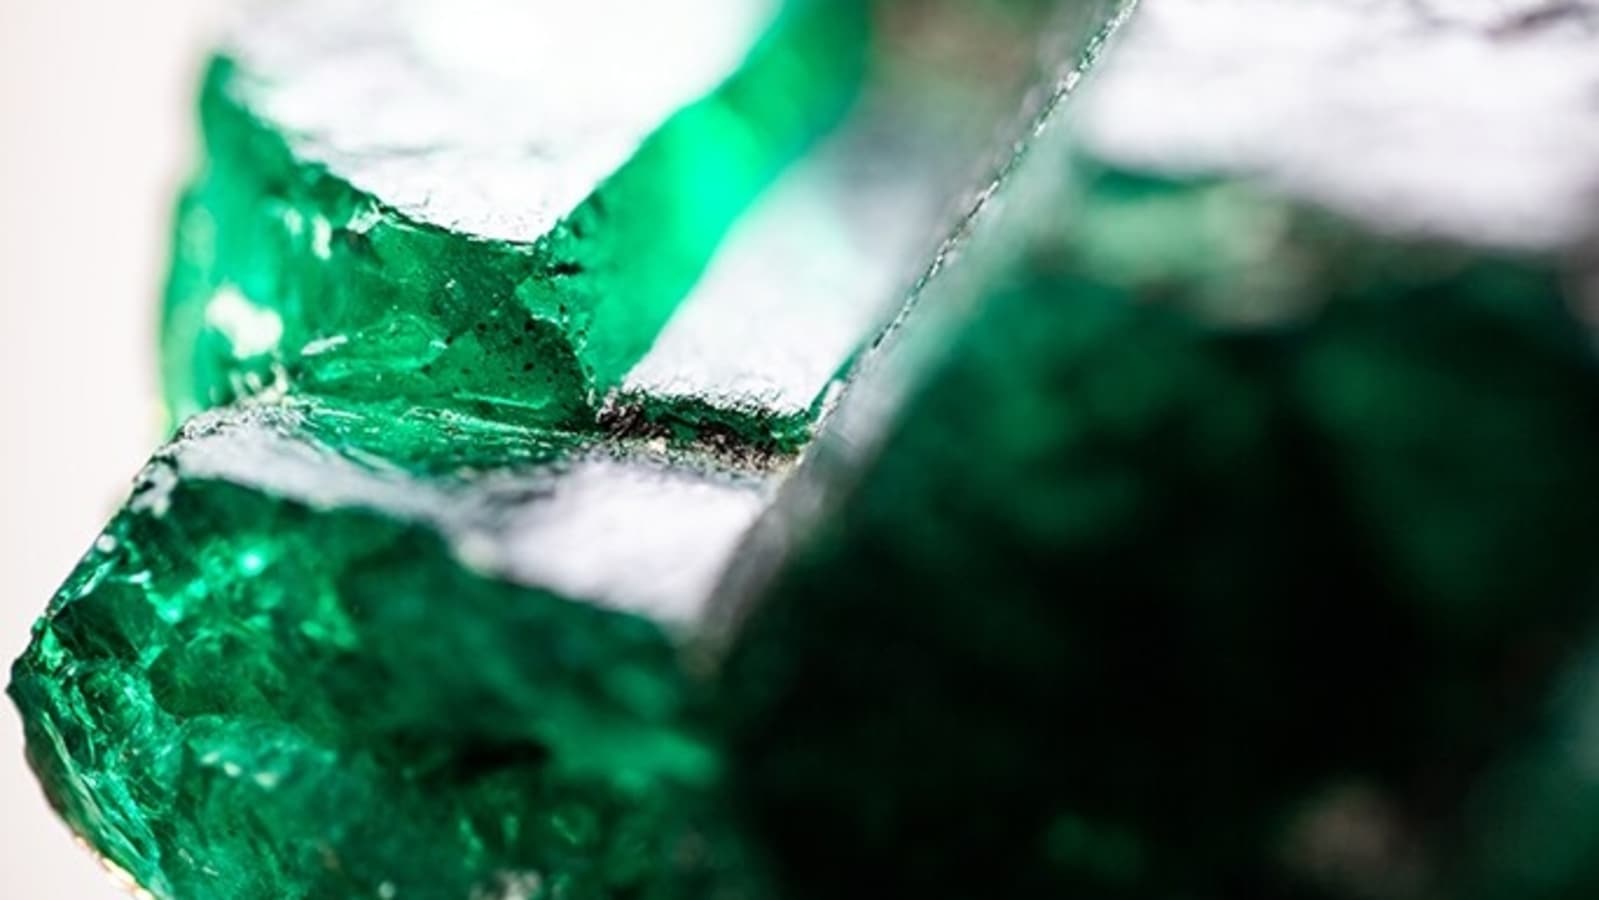 World's largest uncut emerald unearthed in Zambia, reminds people of ...